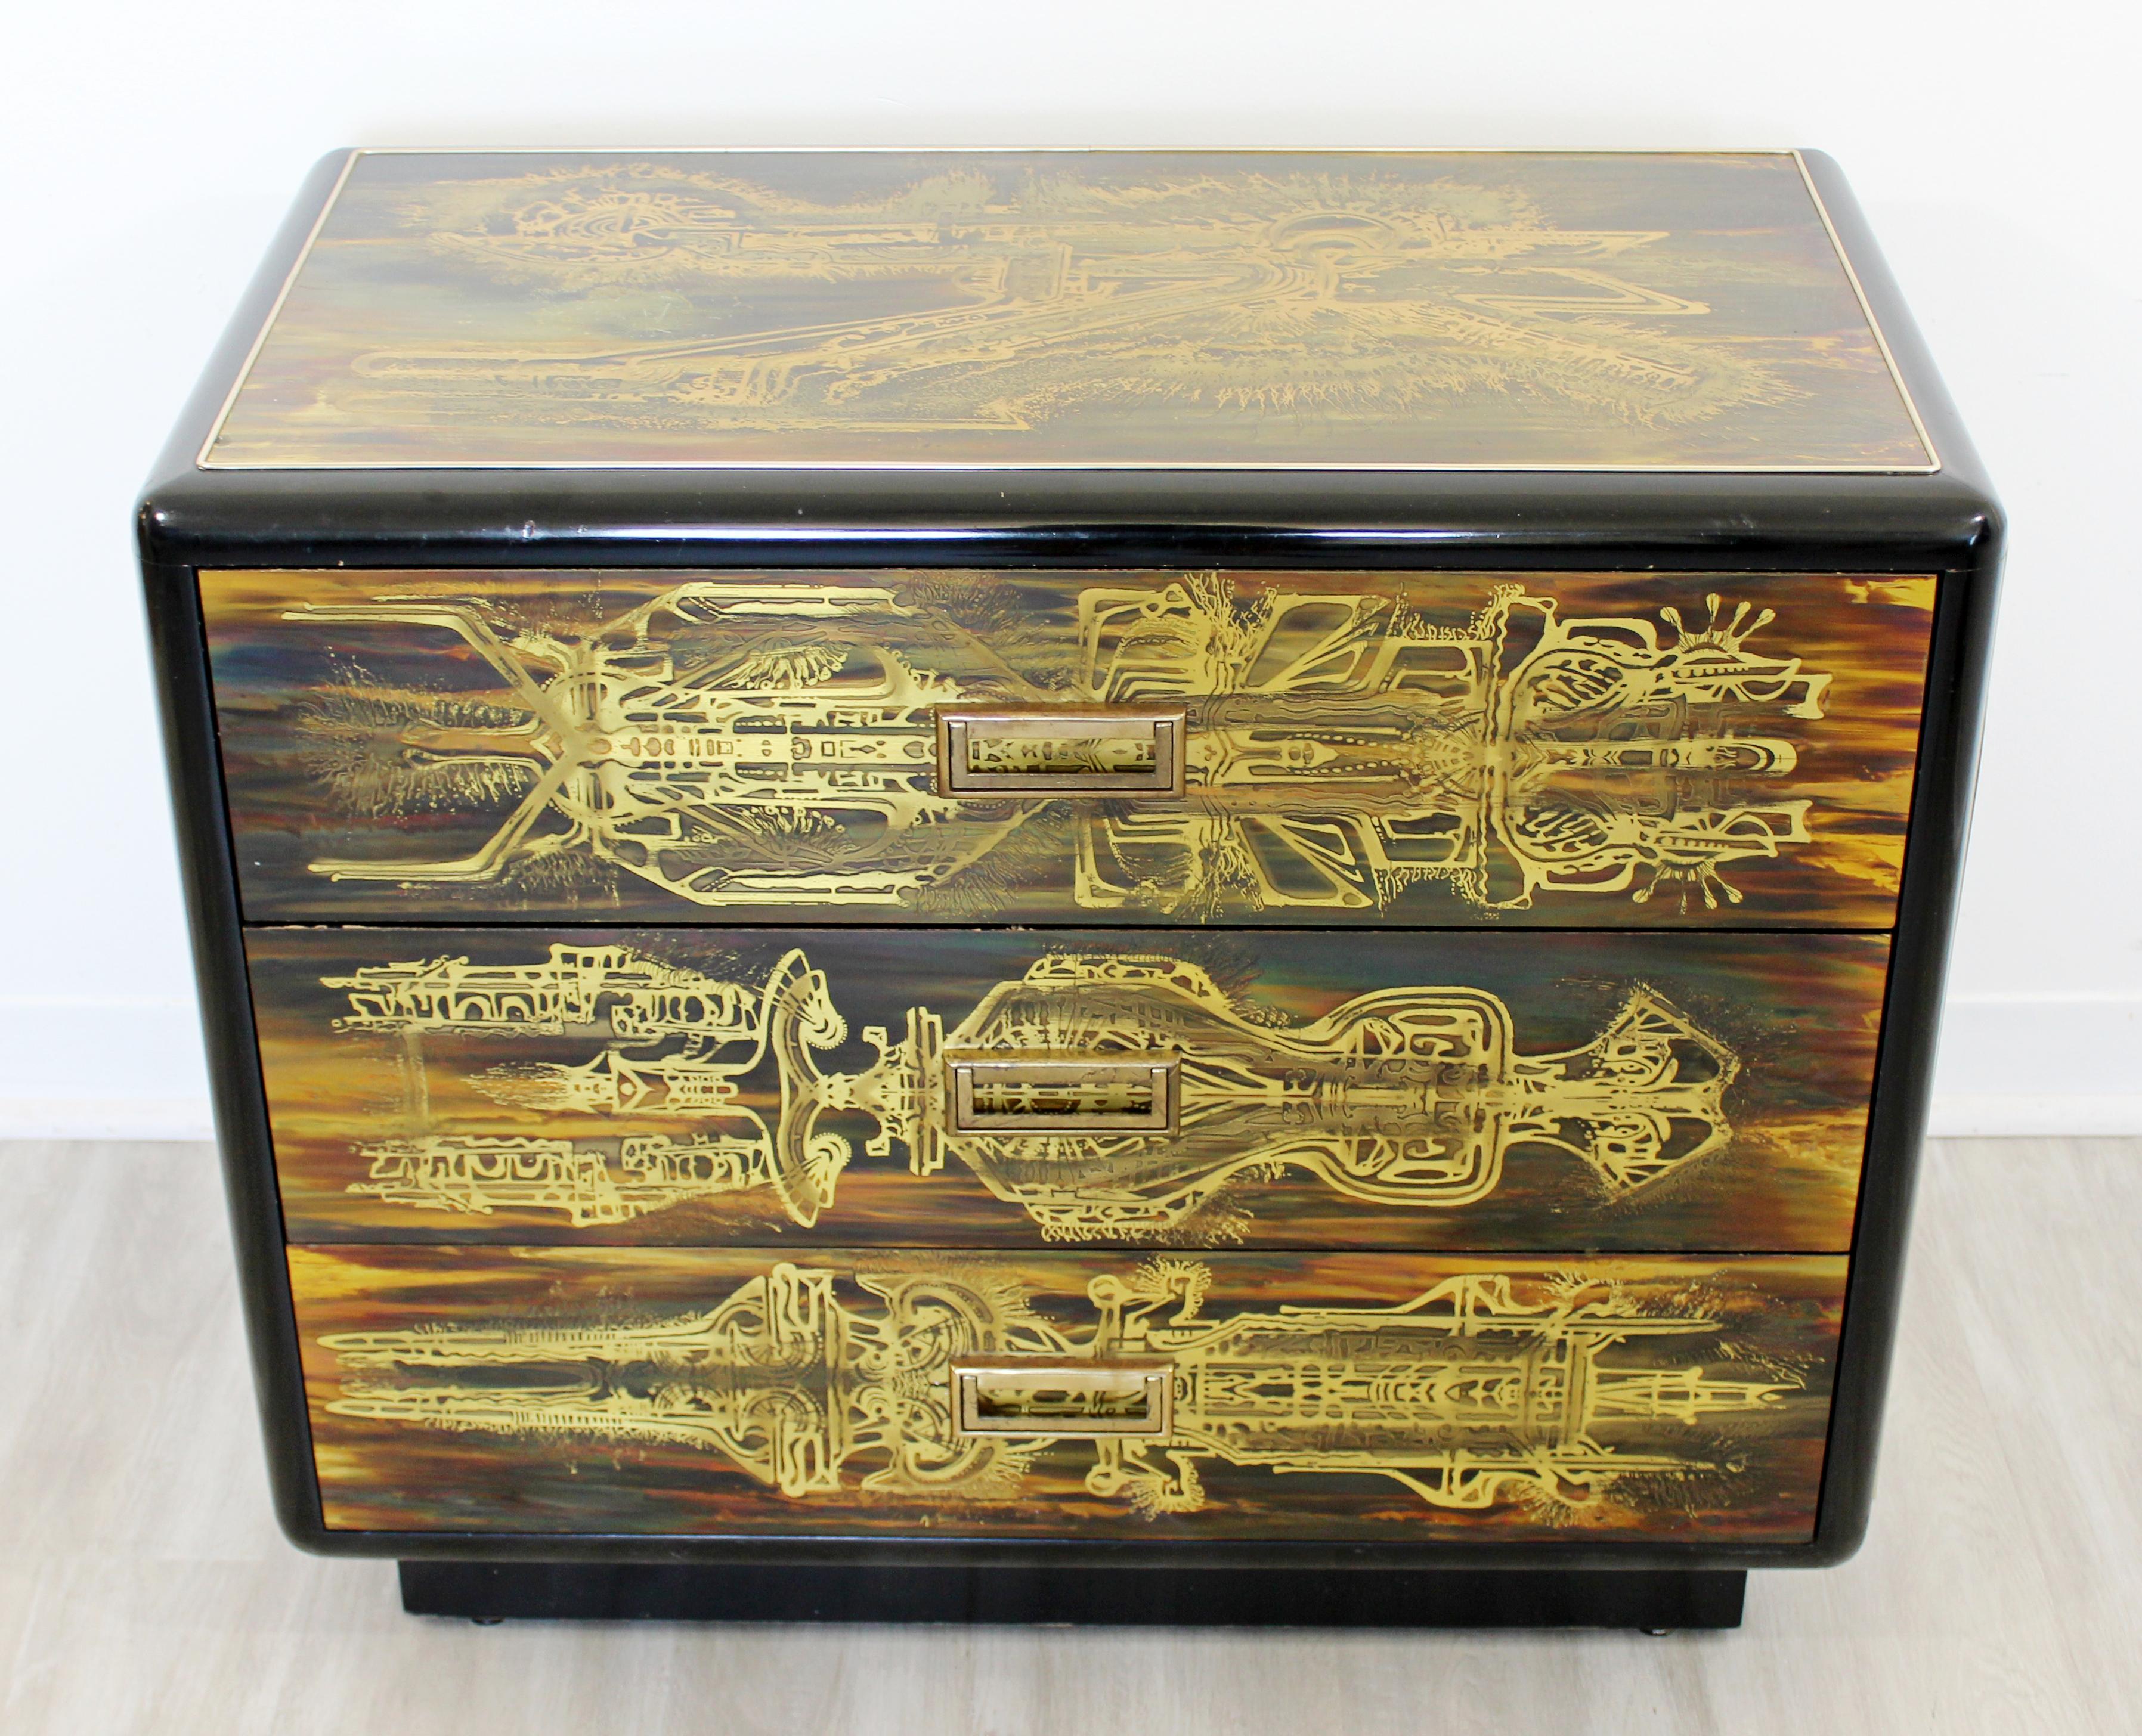 For your consideration is an amazing acid etched mirror and black lacquer cabinet of drawers, with a chinoiserie design, by Bernard Rohne for Mastercraft, circa early 1970s. In excellent vintage condition. The dimensions of the cabinet are 31